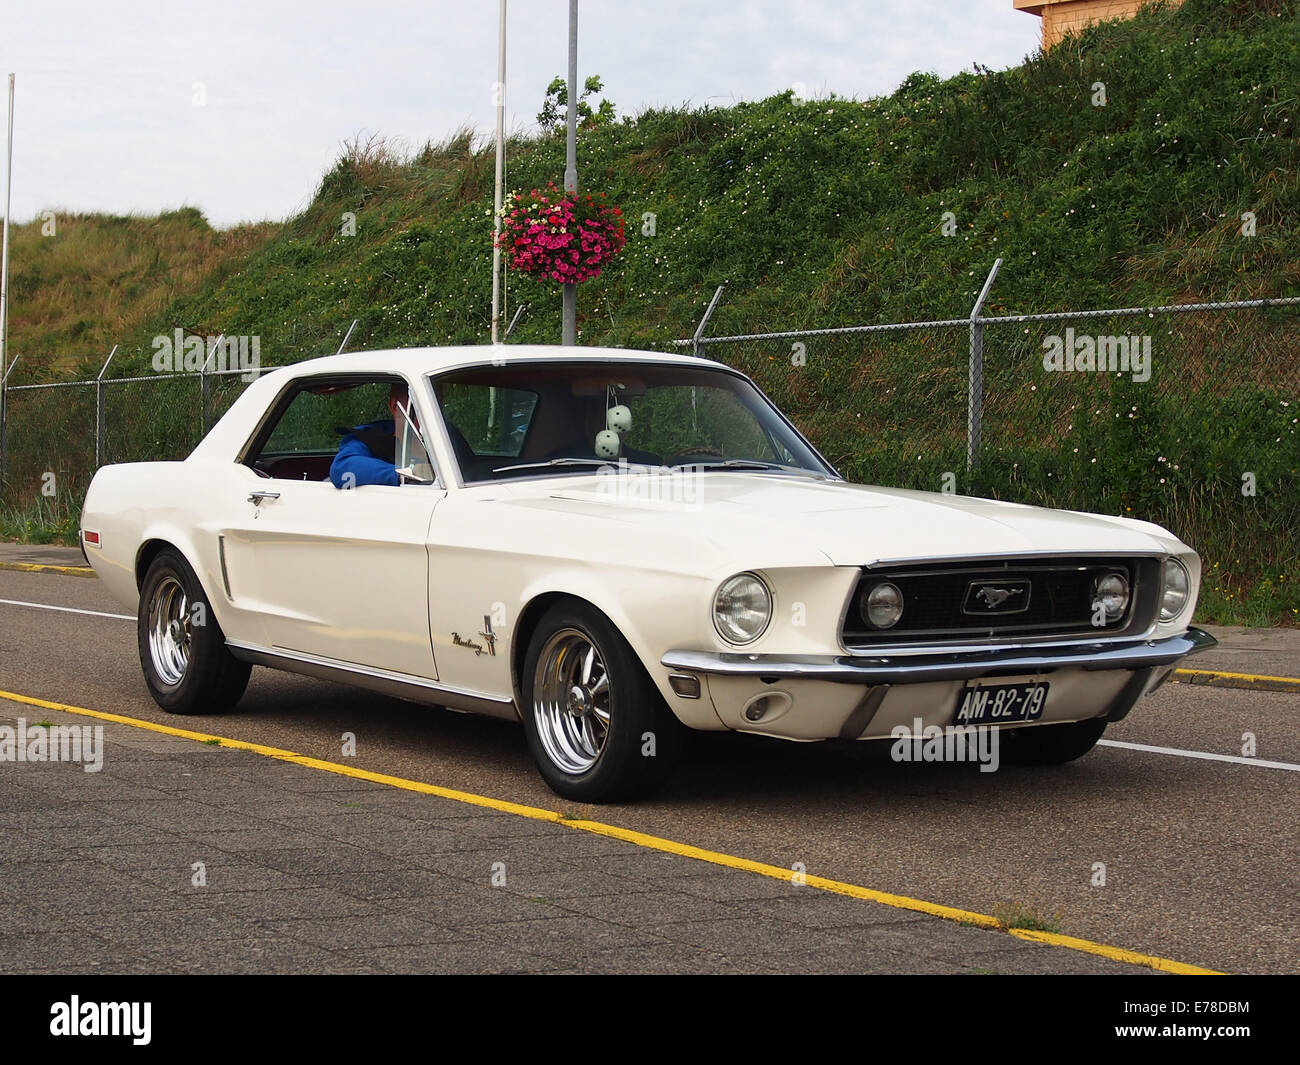 1968 Ford Mustang, licenza AM-82-79 pic2 Foto Stock